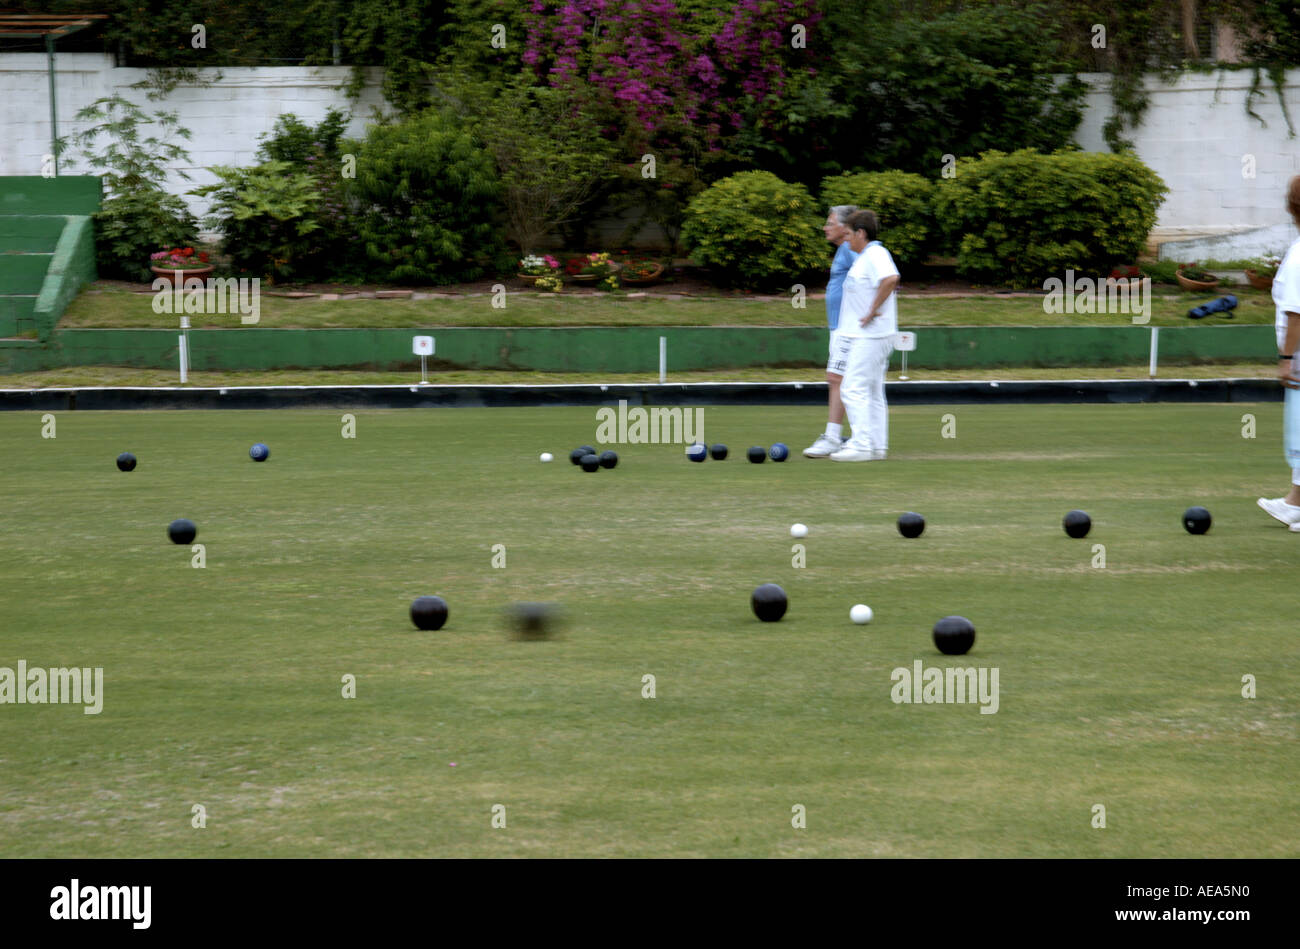 Team play on a Lawn bowling green Stock Photo